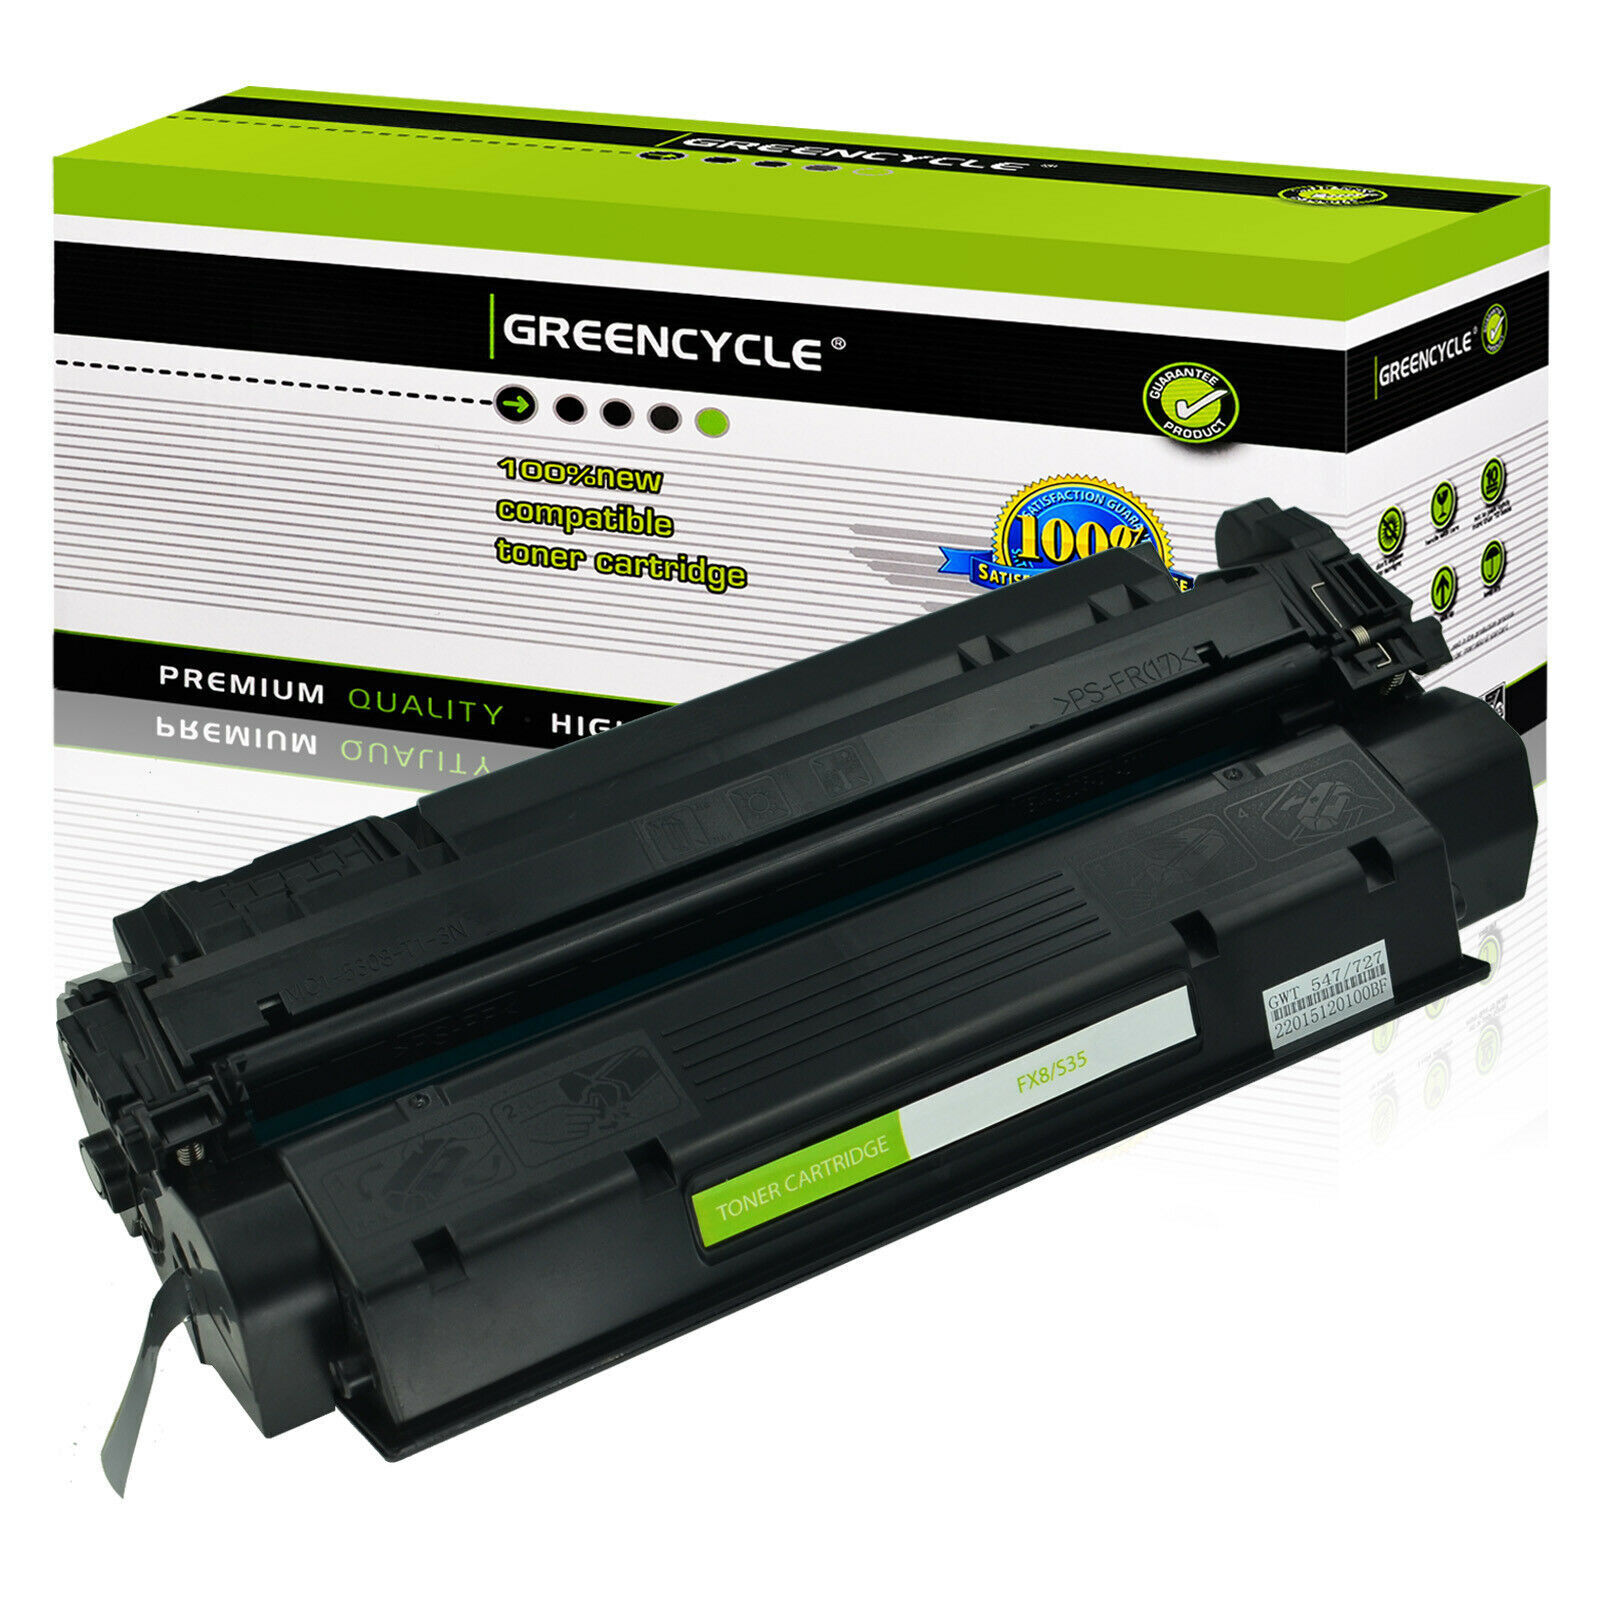 GREENCYCLE FX-8 Toner Cartridge for Canon Laser Class 310 510 FAX L380S Printers